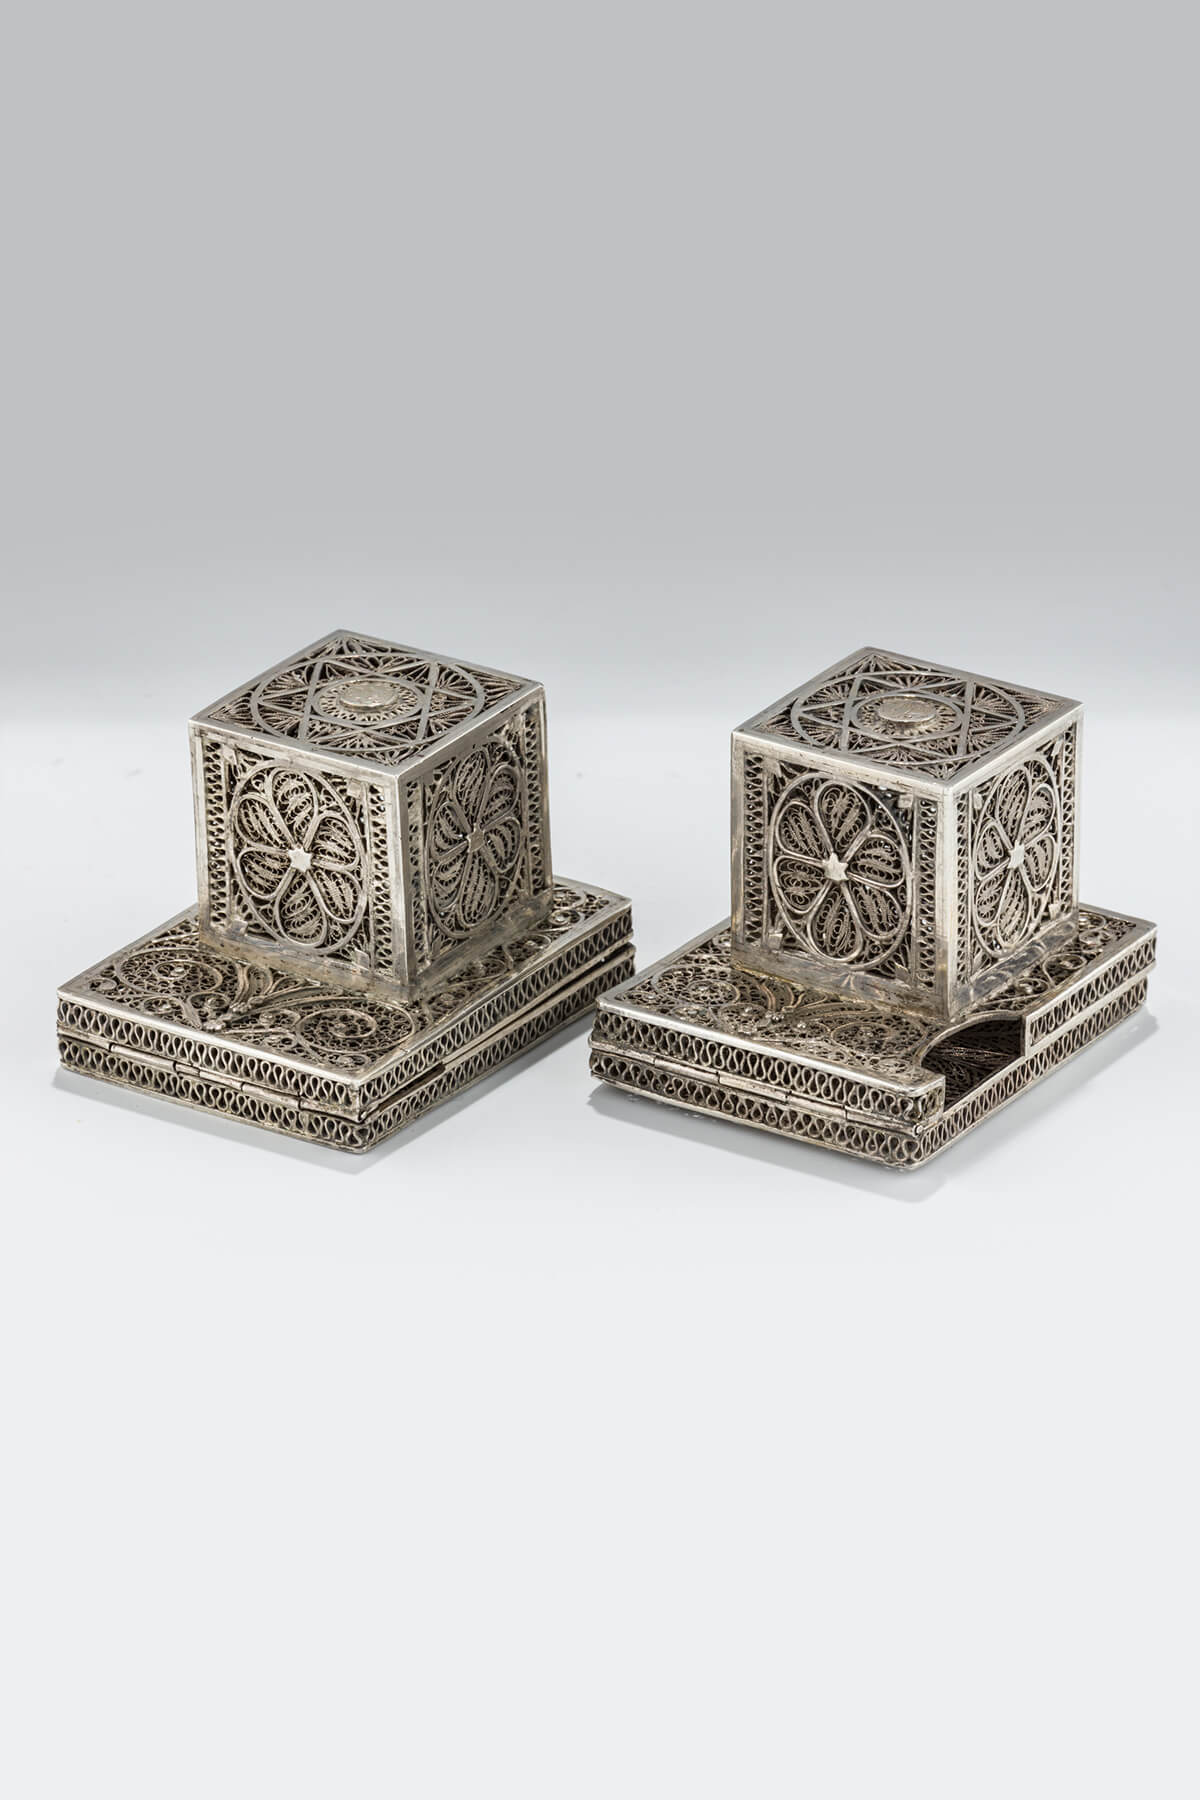 088. An Early Pair of Silver Tefillin Cases by Bezalel